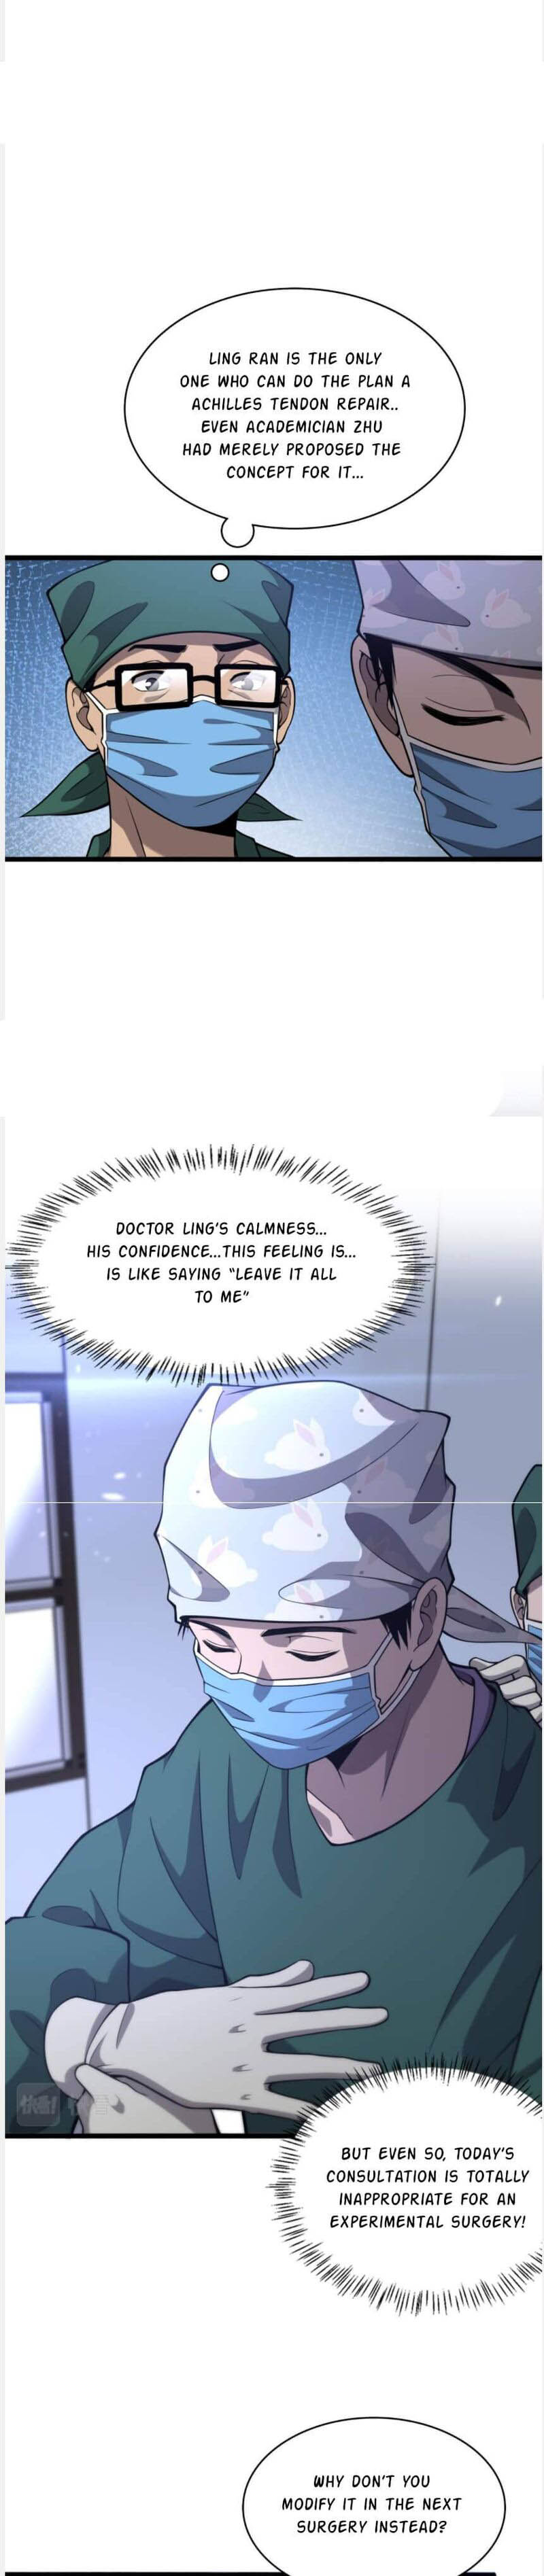 great_doctor_ling_ran_113_4